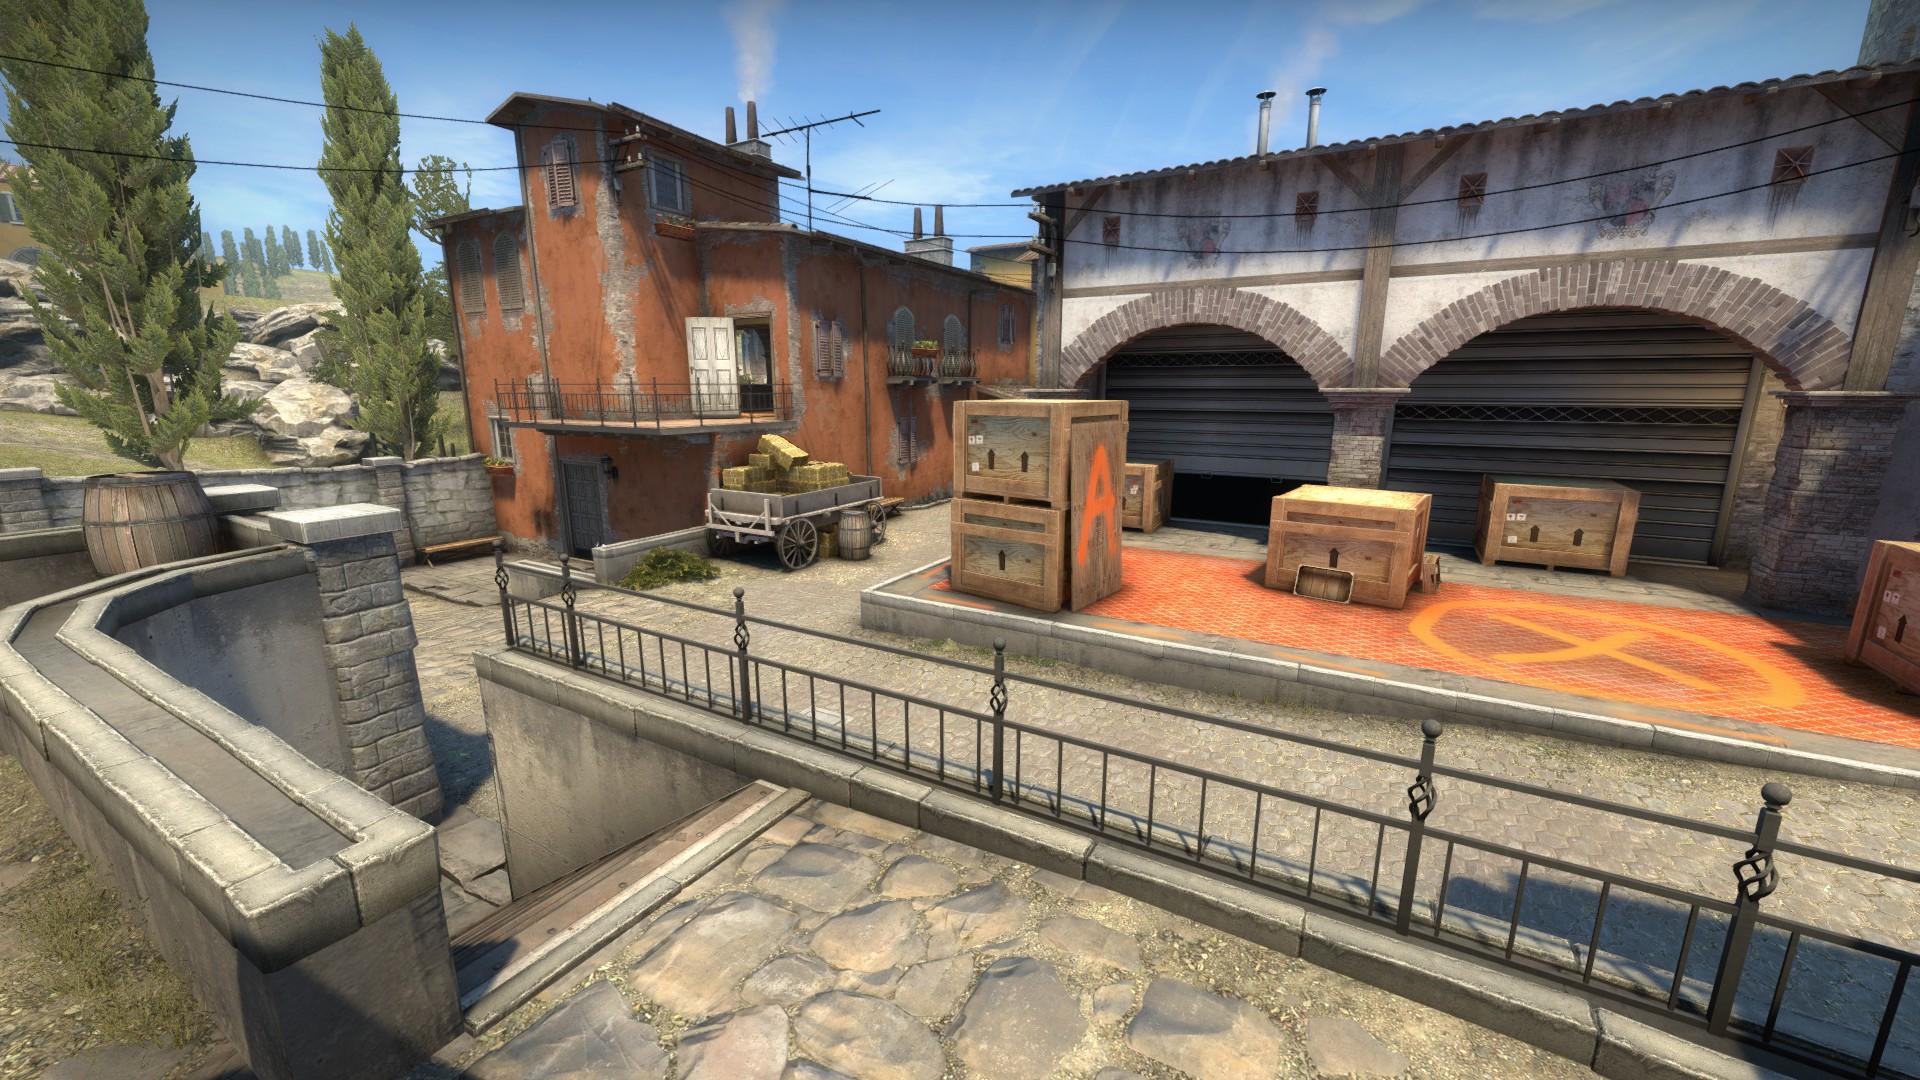 CSGO Source 2 port release date reportedly revealed - Dexerto